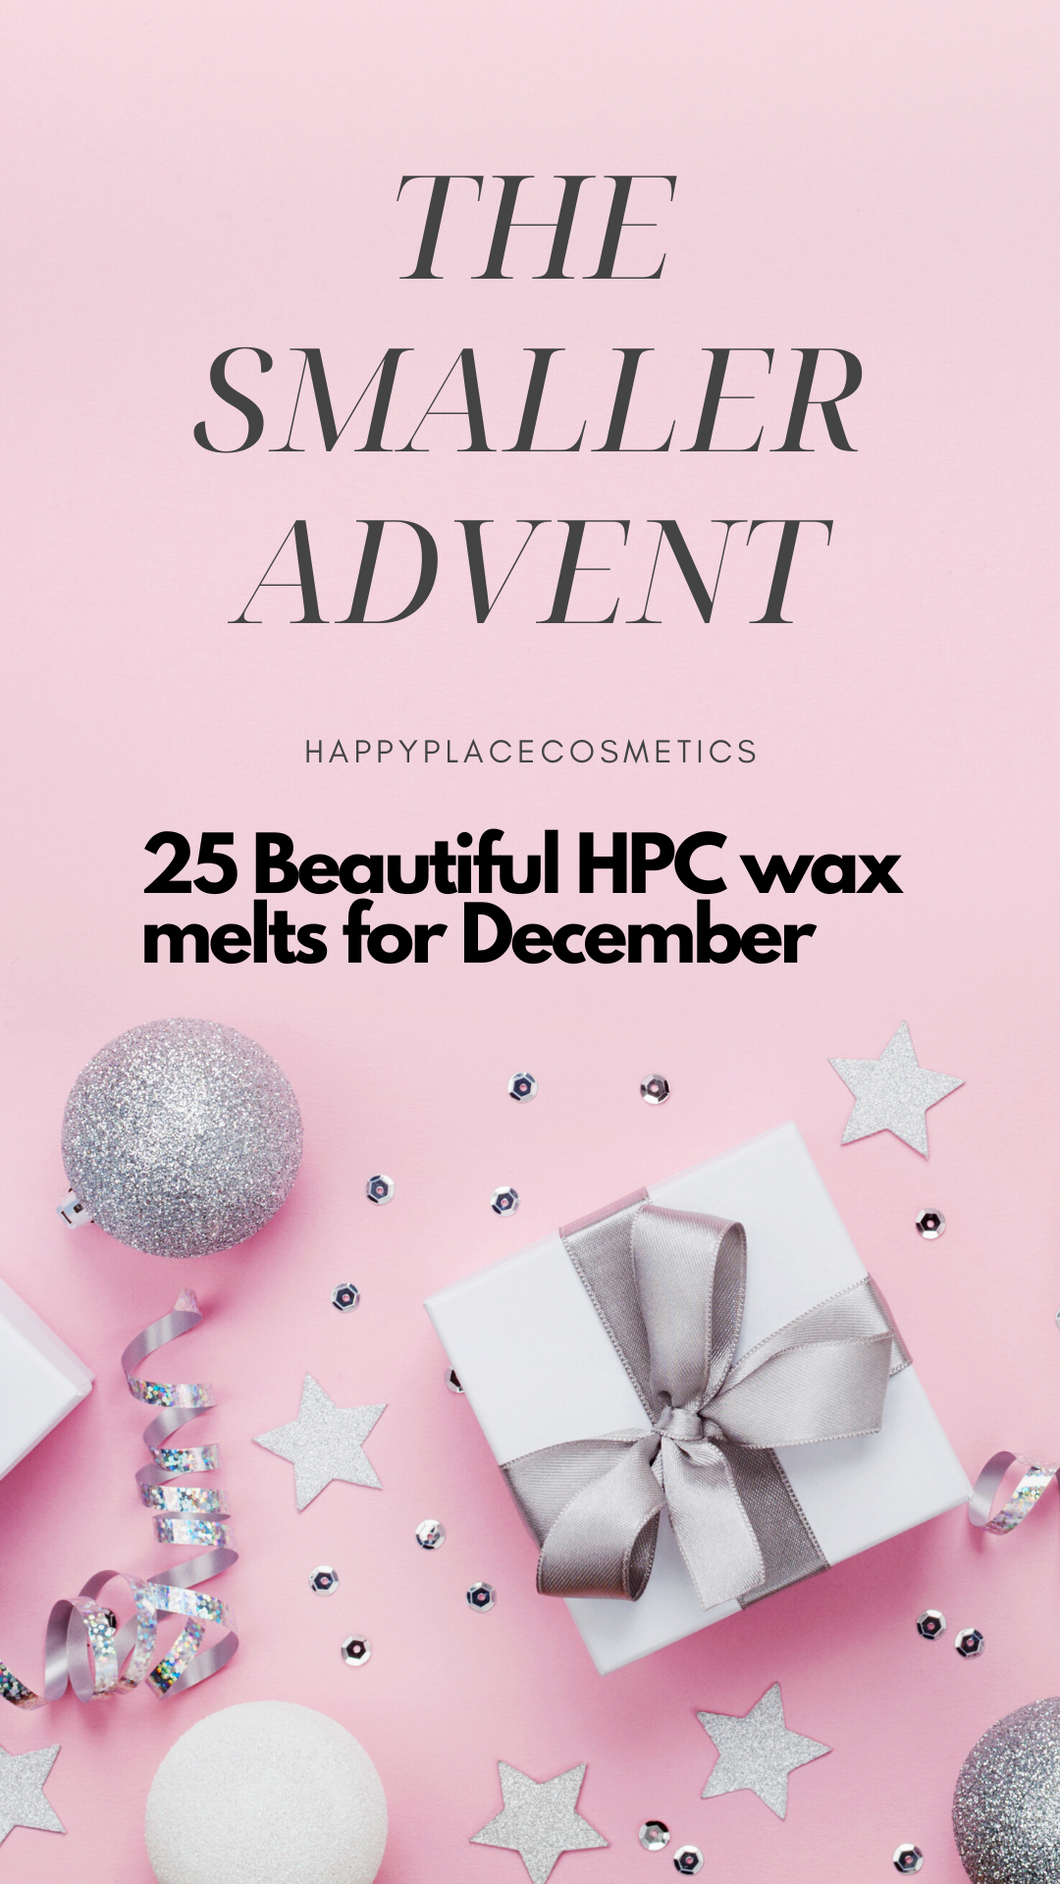 The Smaller Wax Advent